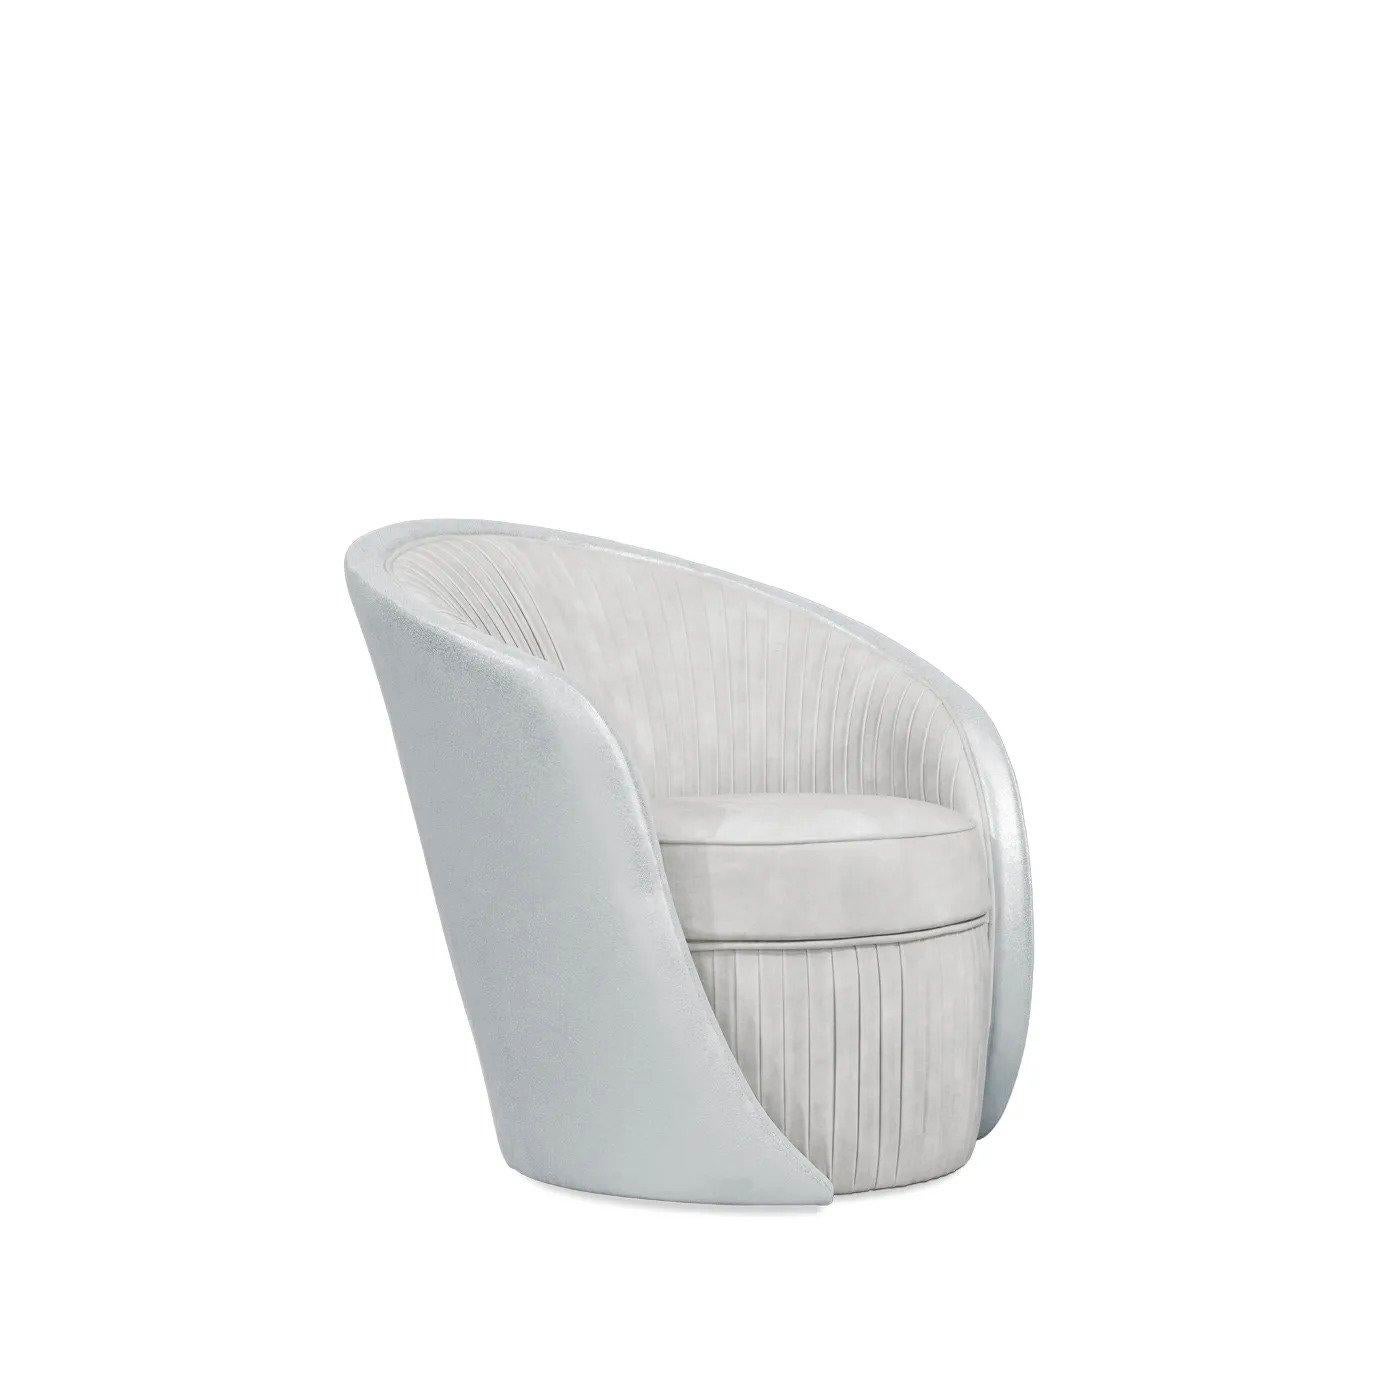 Wrap yourself in a soft flower petal and revel in the fluidity of graceful lines gently curving around your body. A fresh new take on femininity, the Bloom chair was inspired by the tenderness of the prettiest Calla Lily floret and designed by